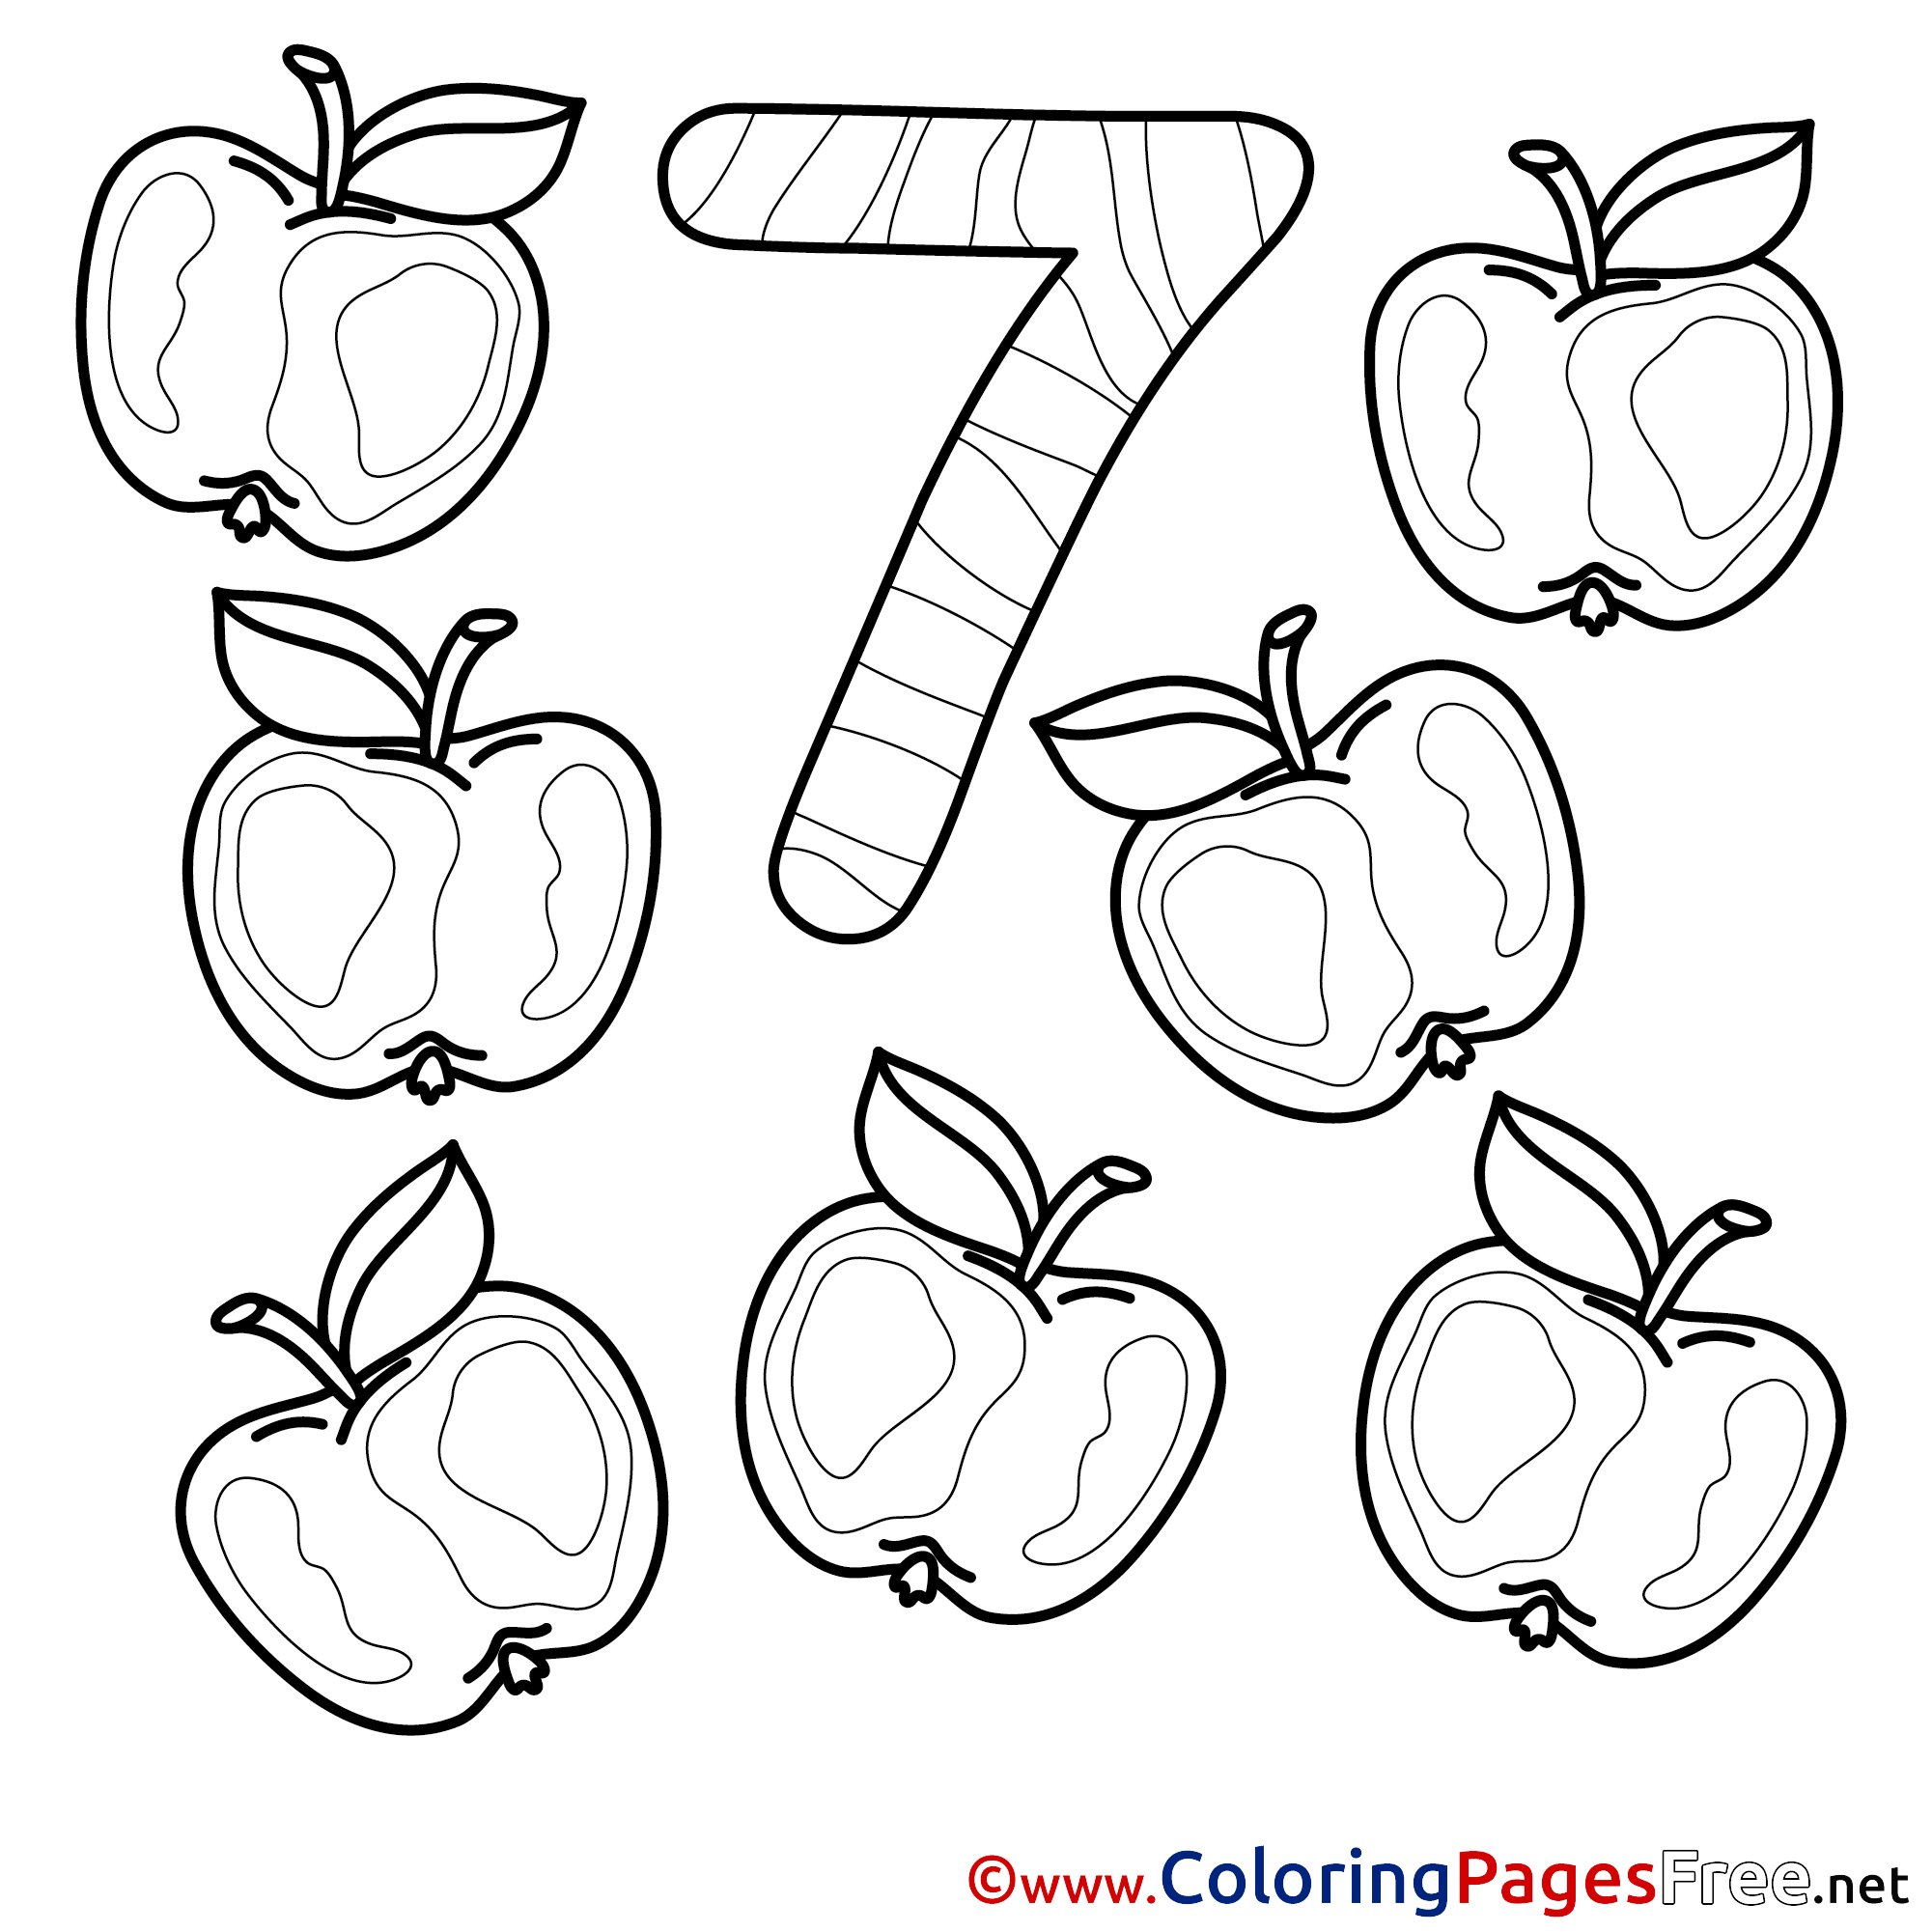 7 Apples download Numbers Coloring Pages